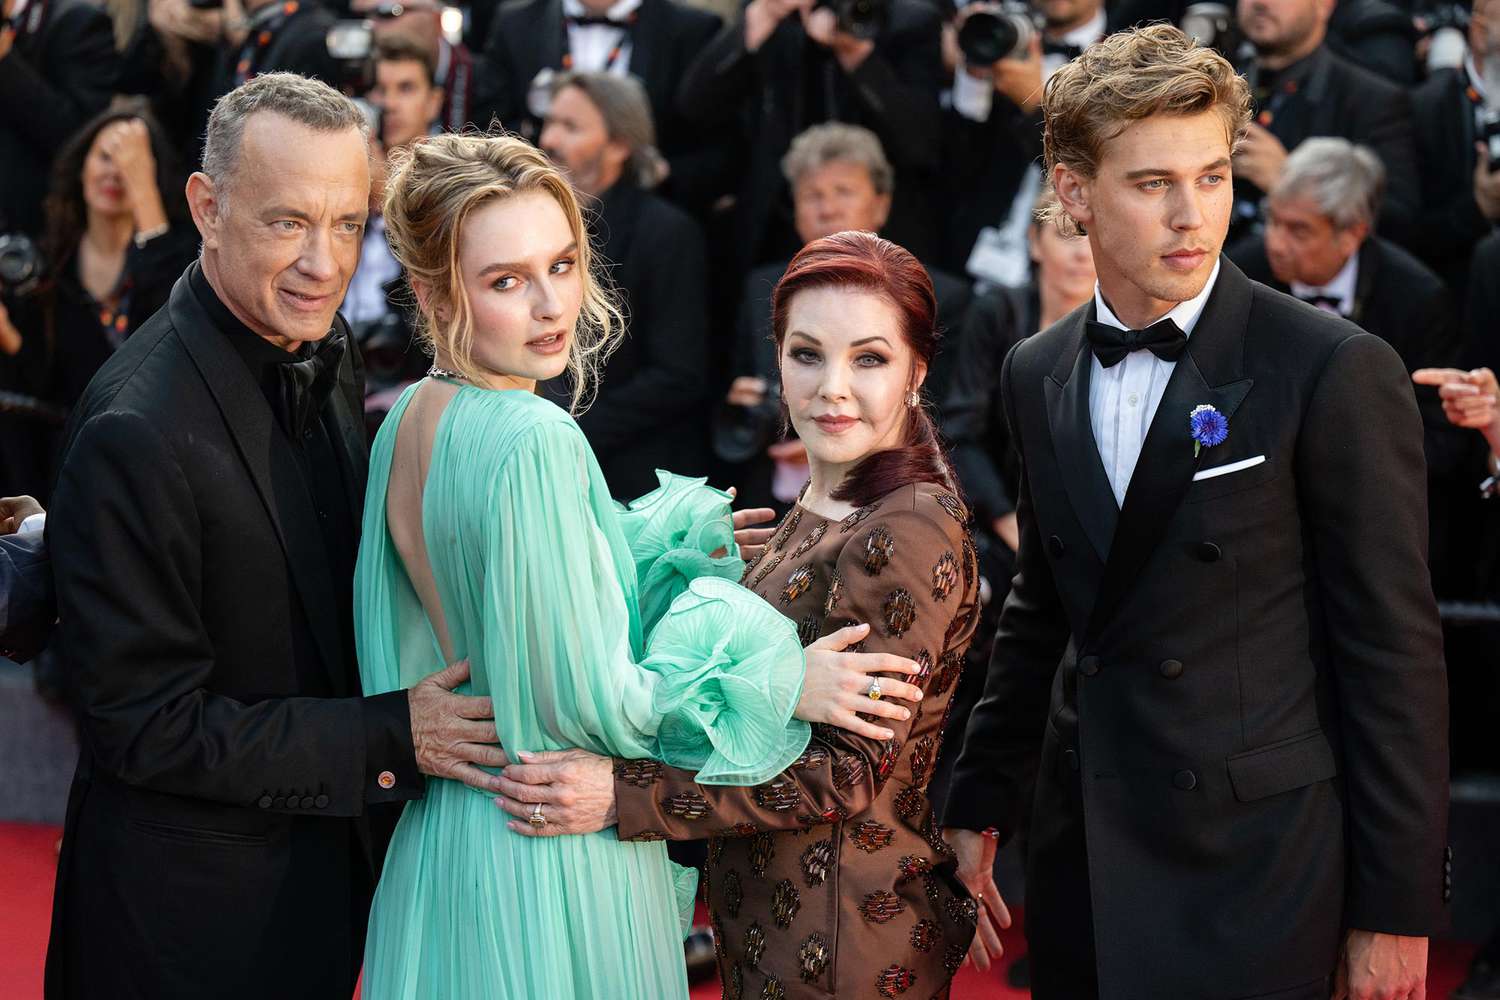 Tom Hanks, Olivia DeJonge, Priscilla Presley and Austin Butler attend the screening of "Elvis" during the 75th annual Cannes film festival at Palais des Festivals on May 25, 2022 in Cannes, France.